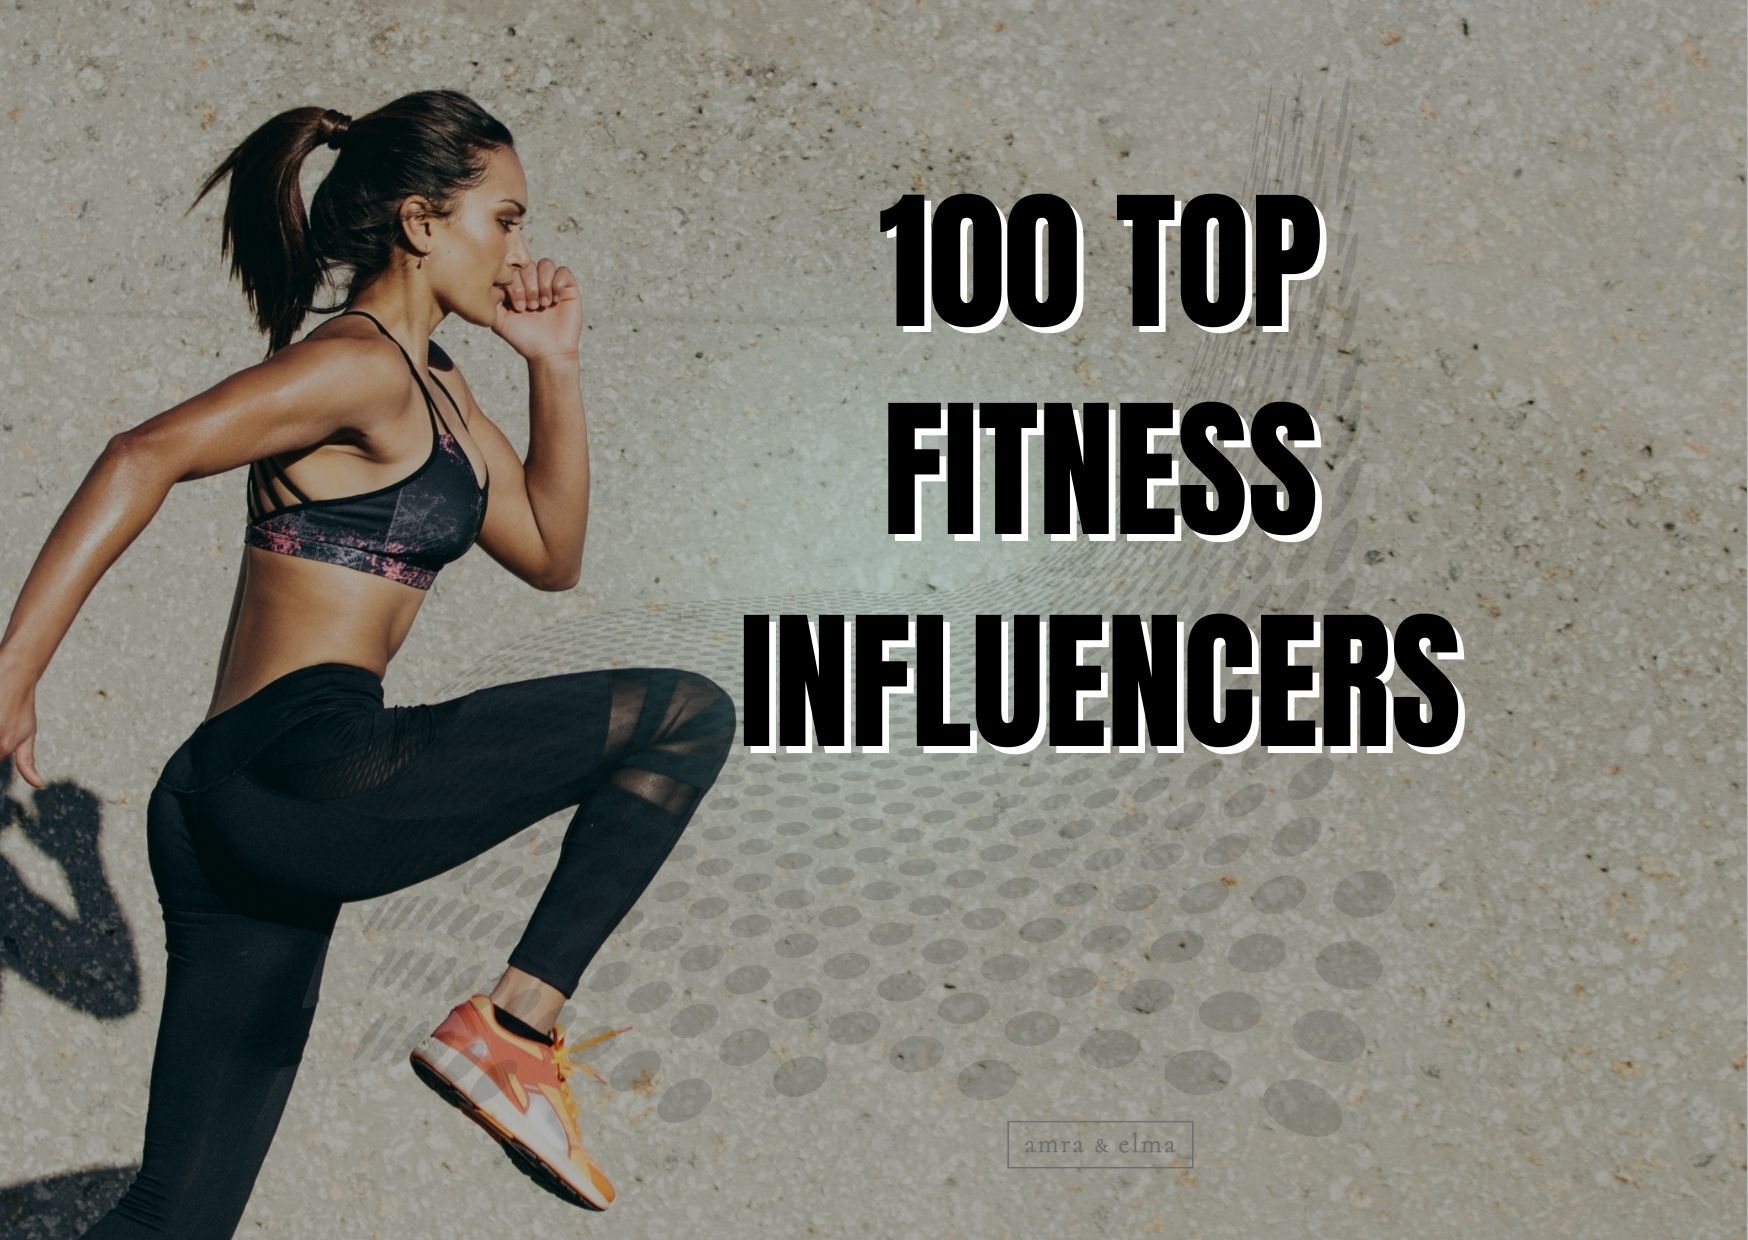 100 top fitness influencers